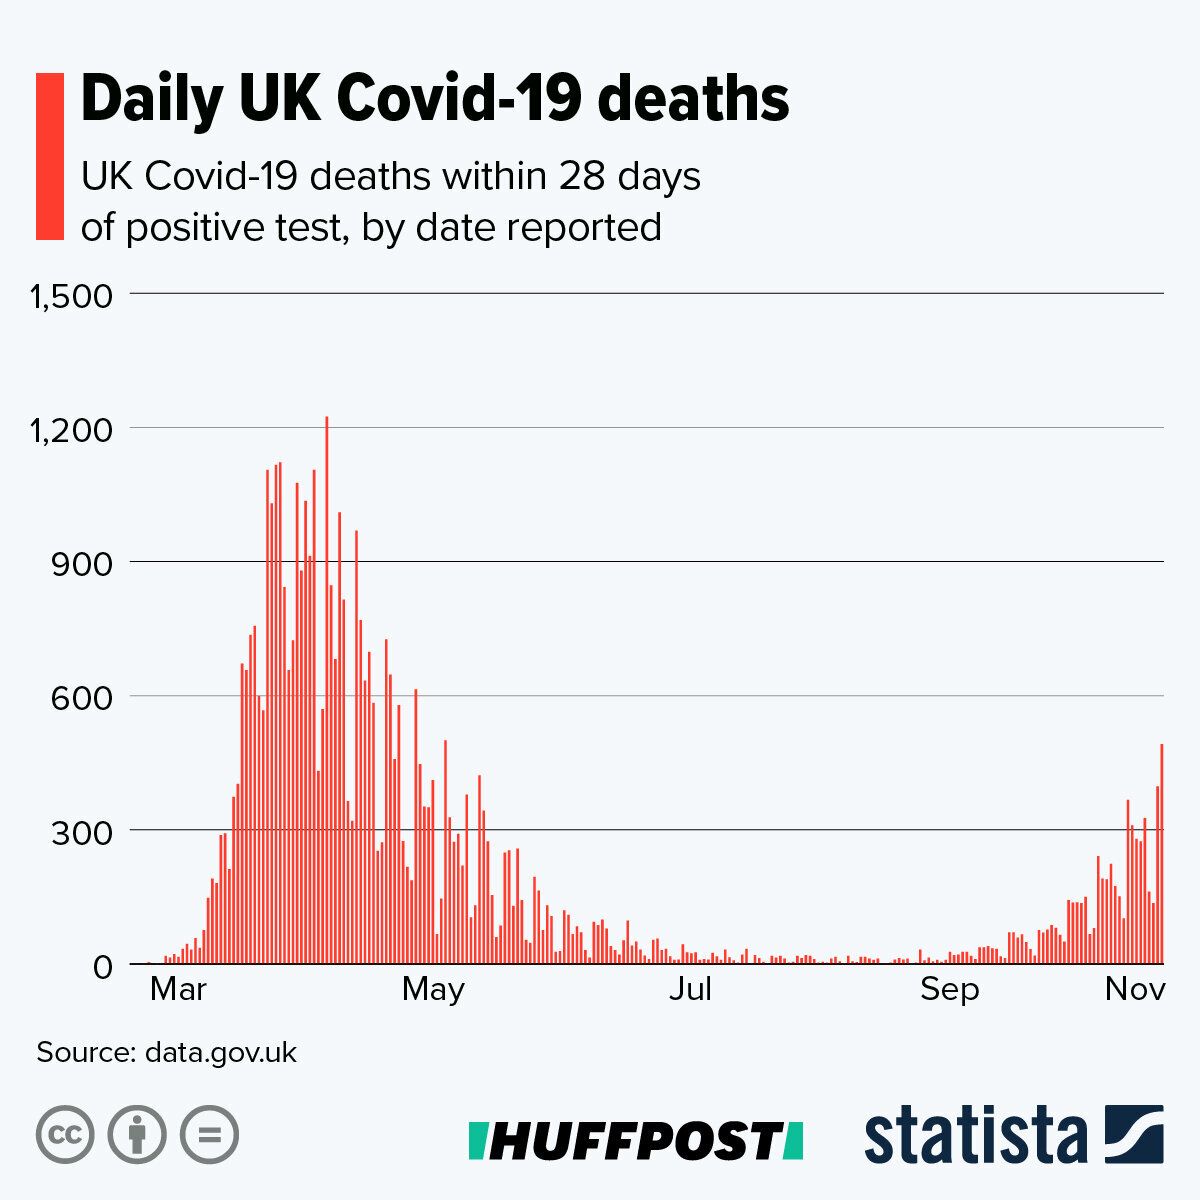 Daily Covid-19 deaths in the UK 